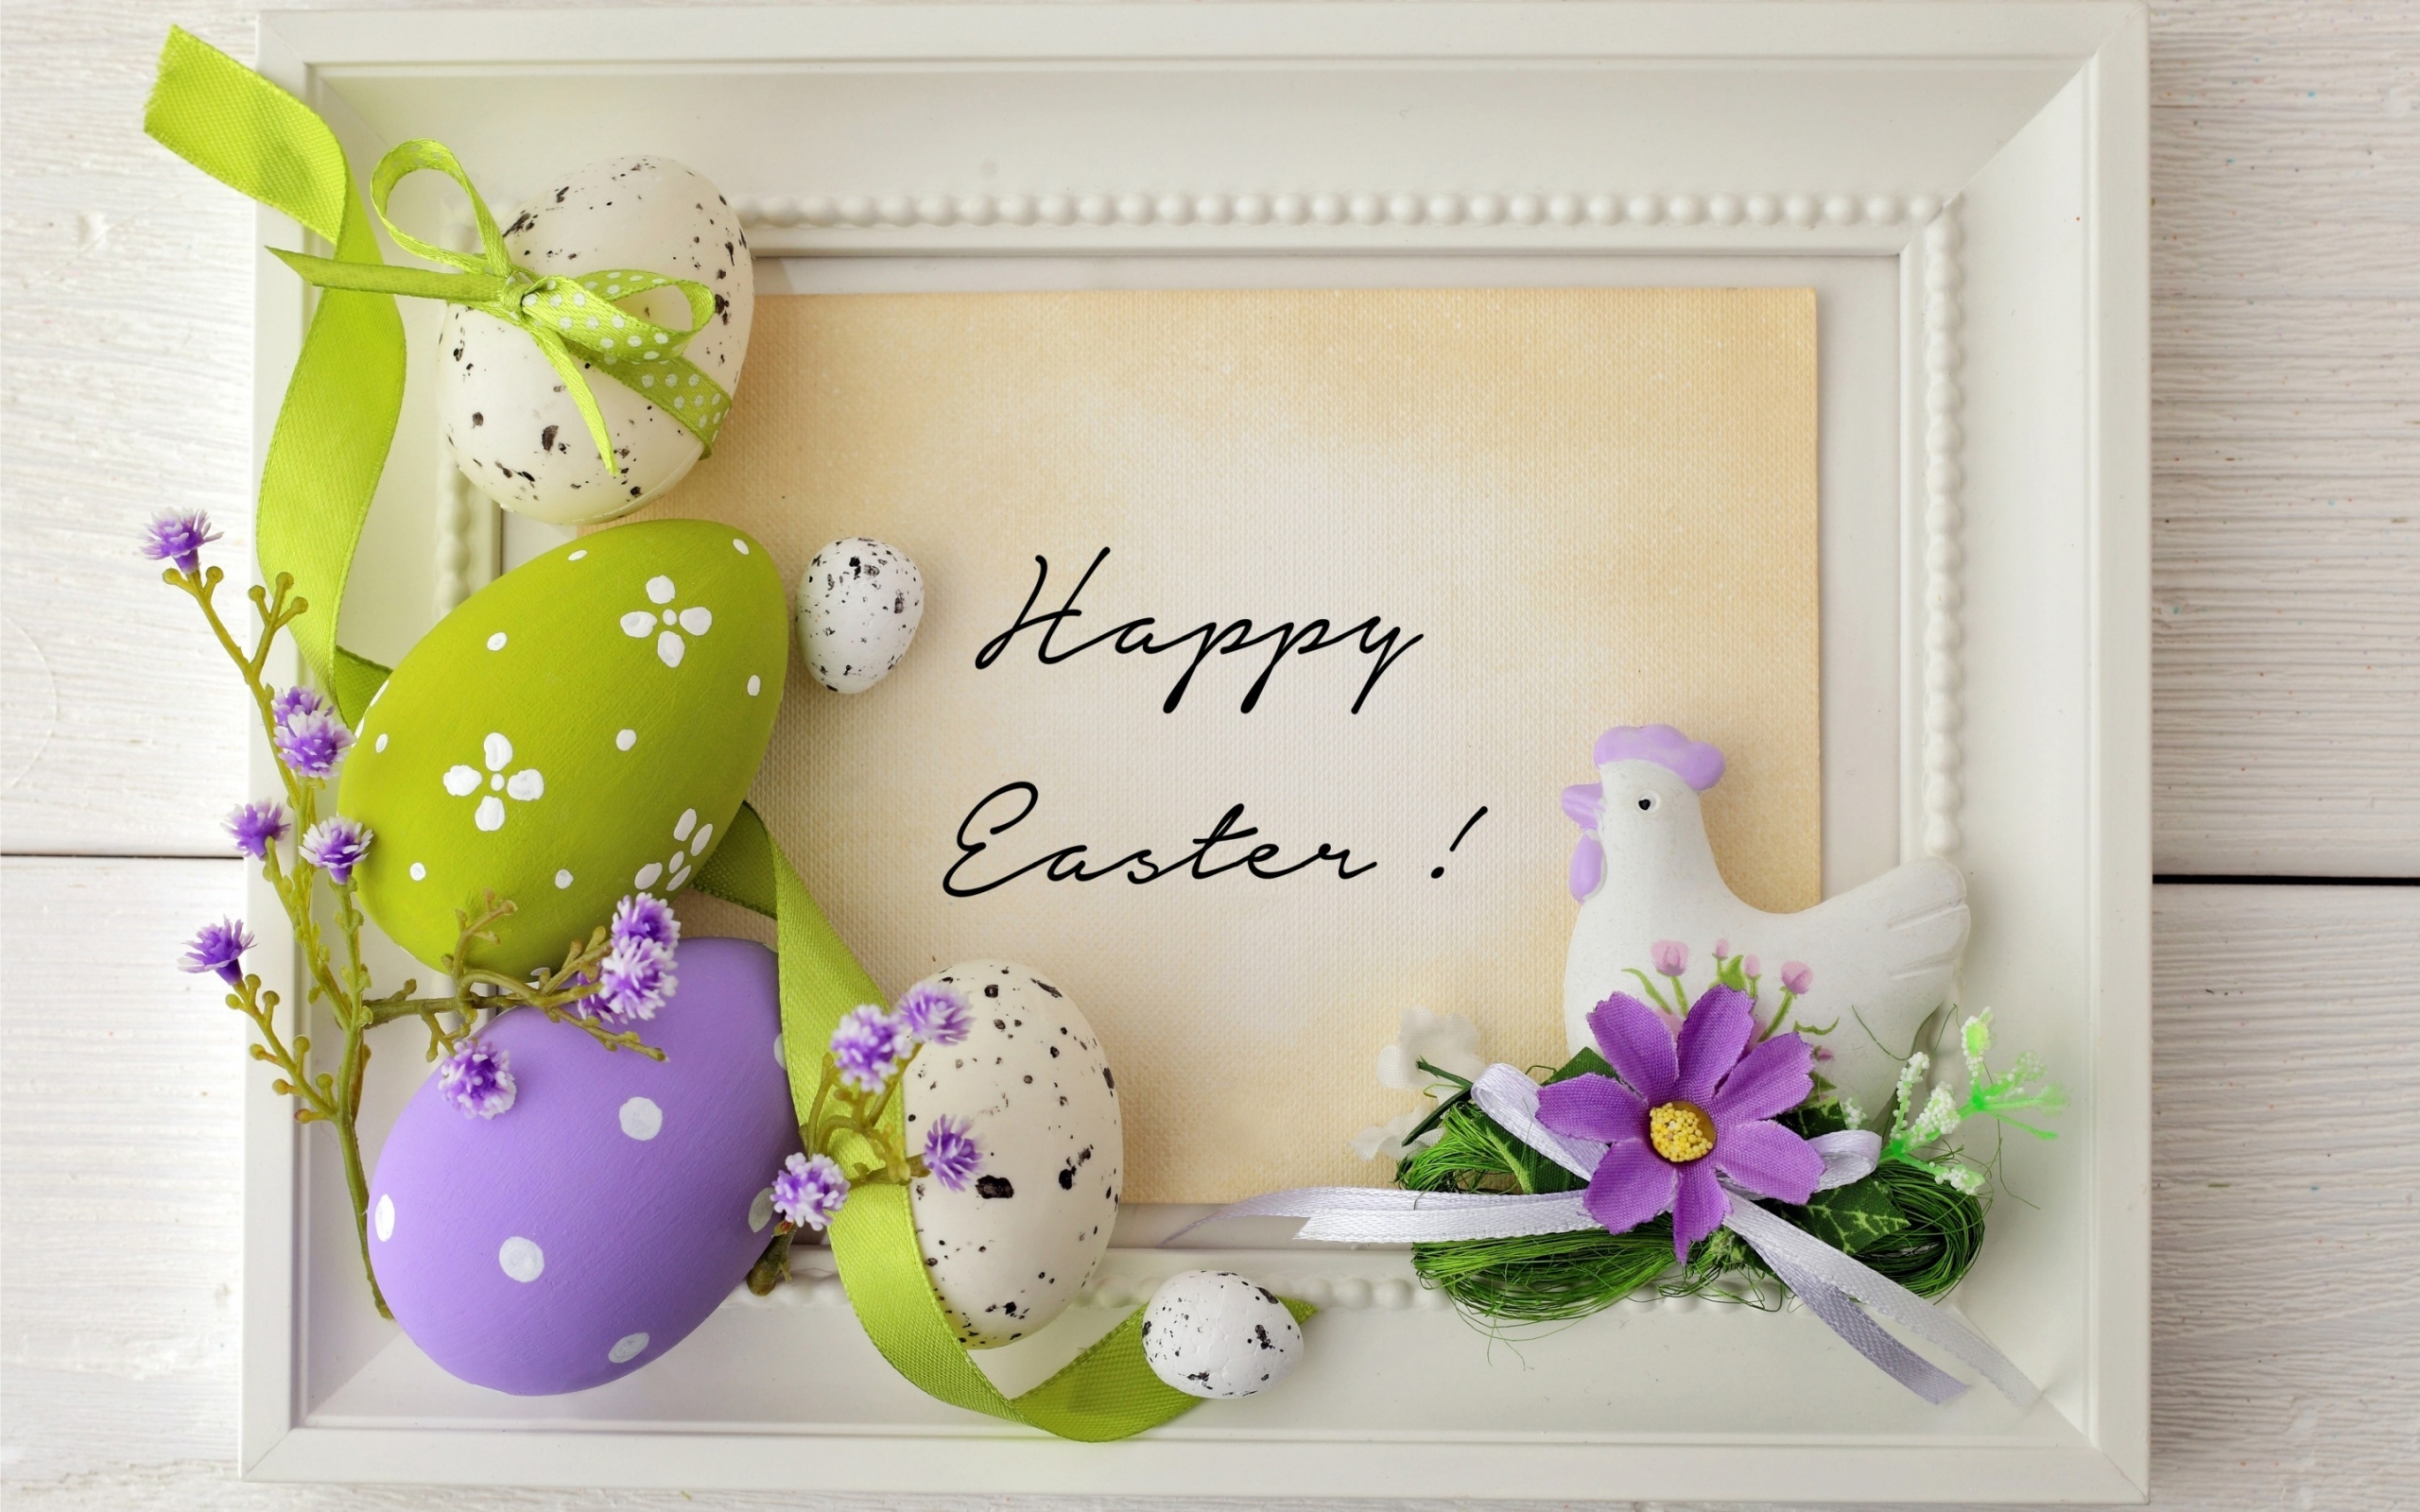 Happy Easter 2015 for 2560 x 1600 widescreen resolution